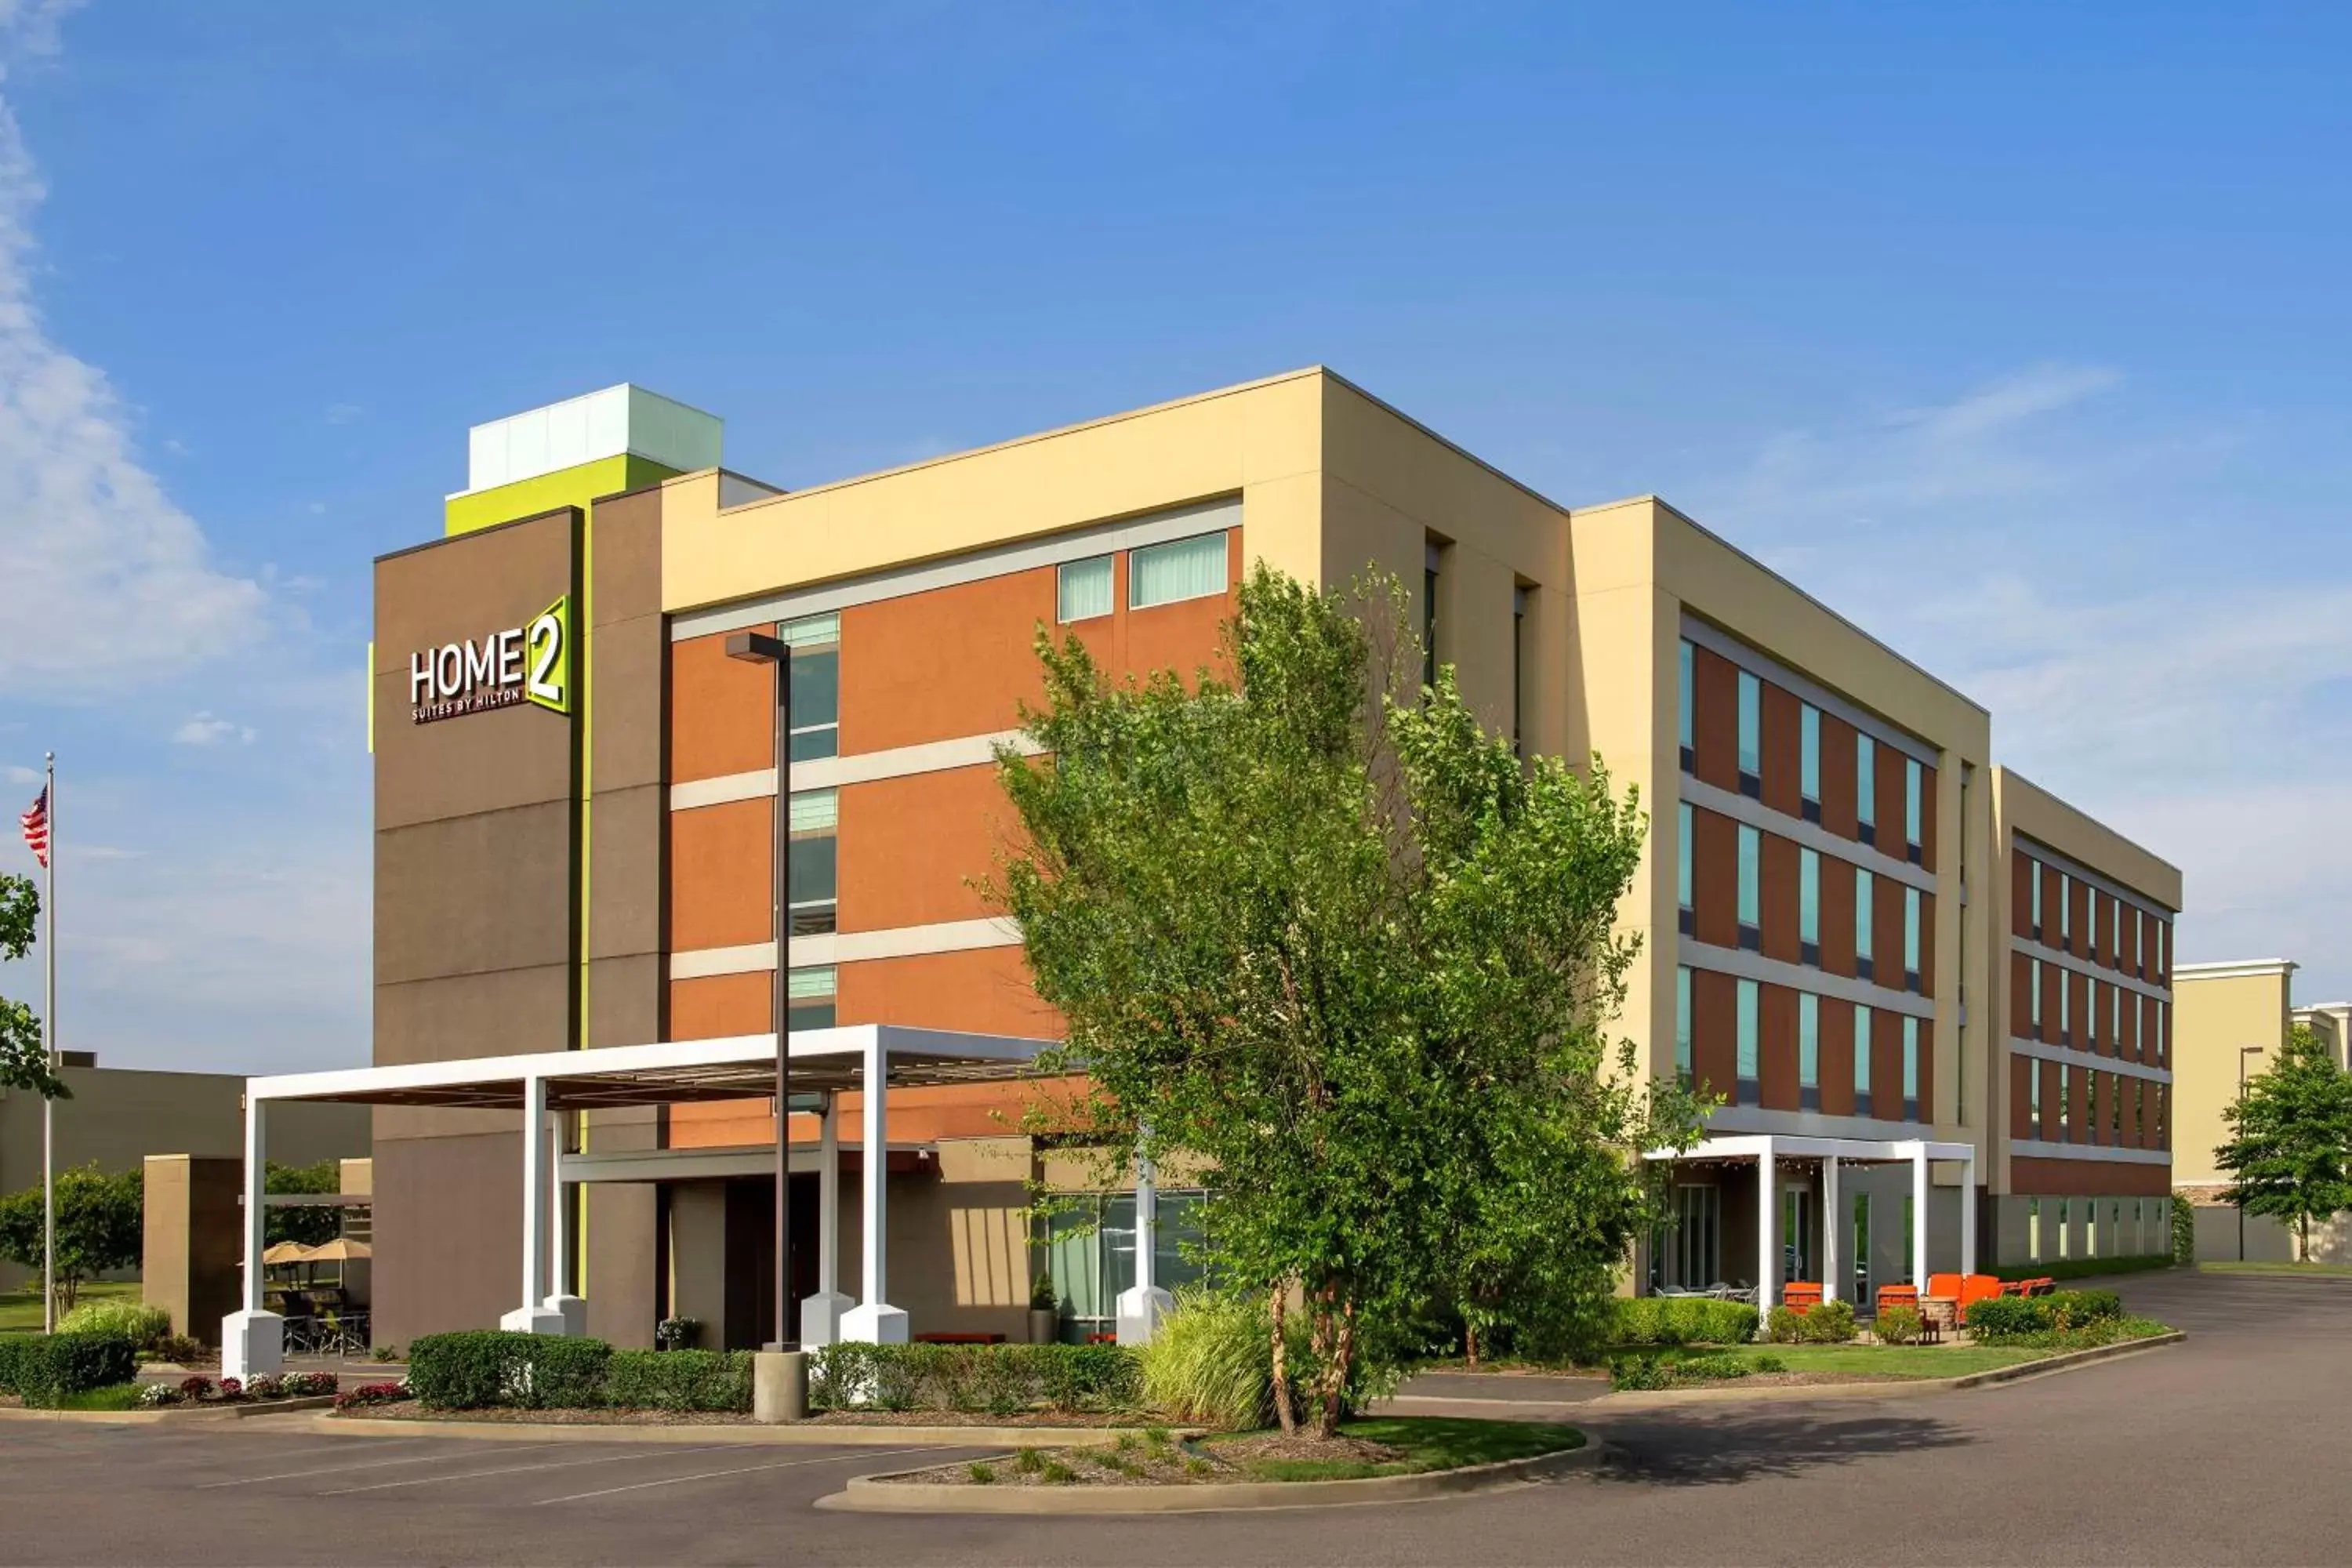 Property Building in Home2 Suites by Hilton - Memphis/Southaven